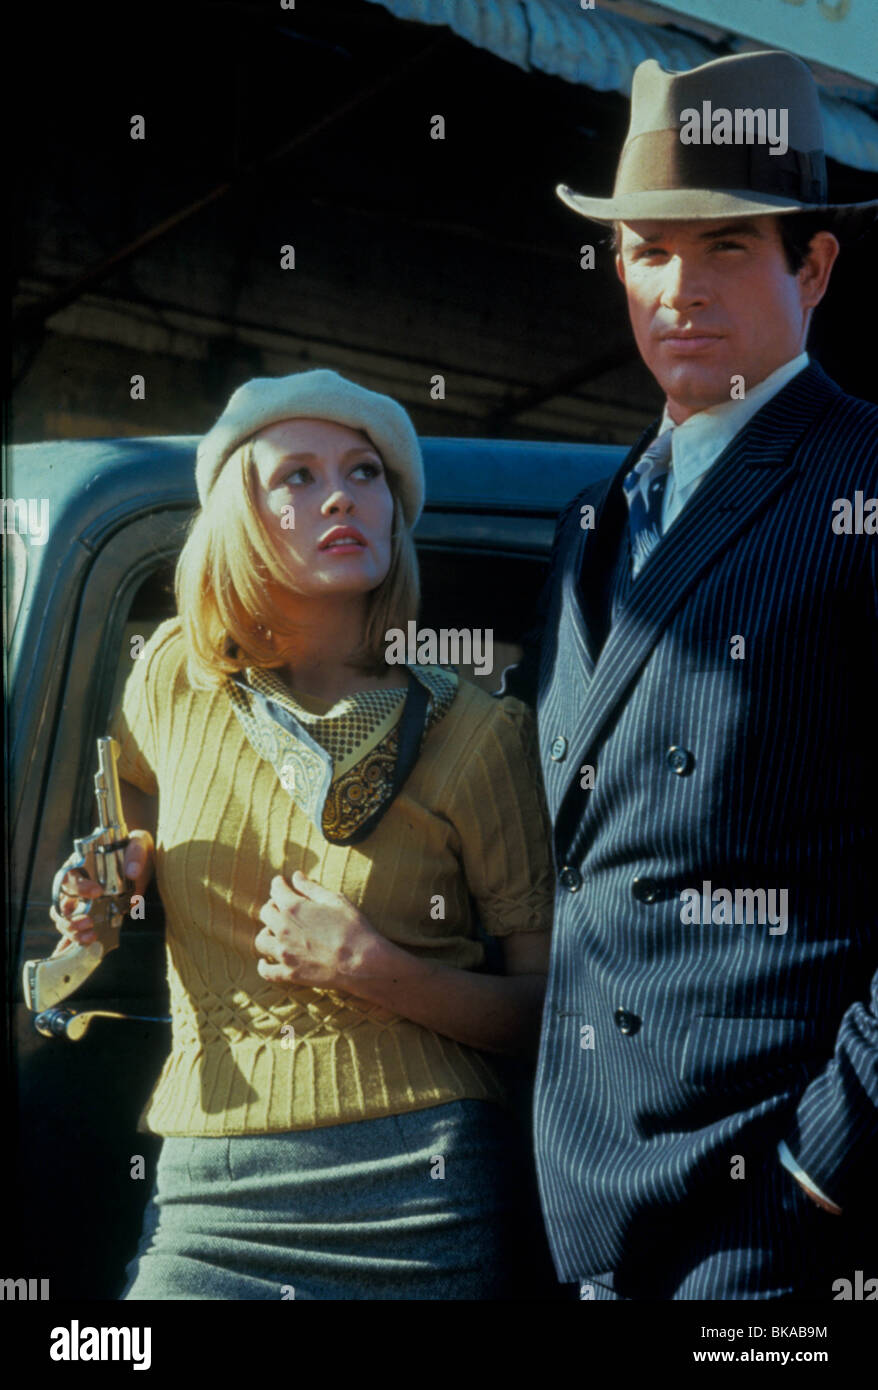 music download bonnie and clyde